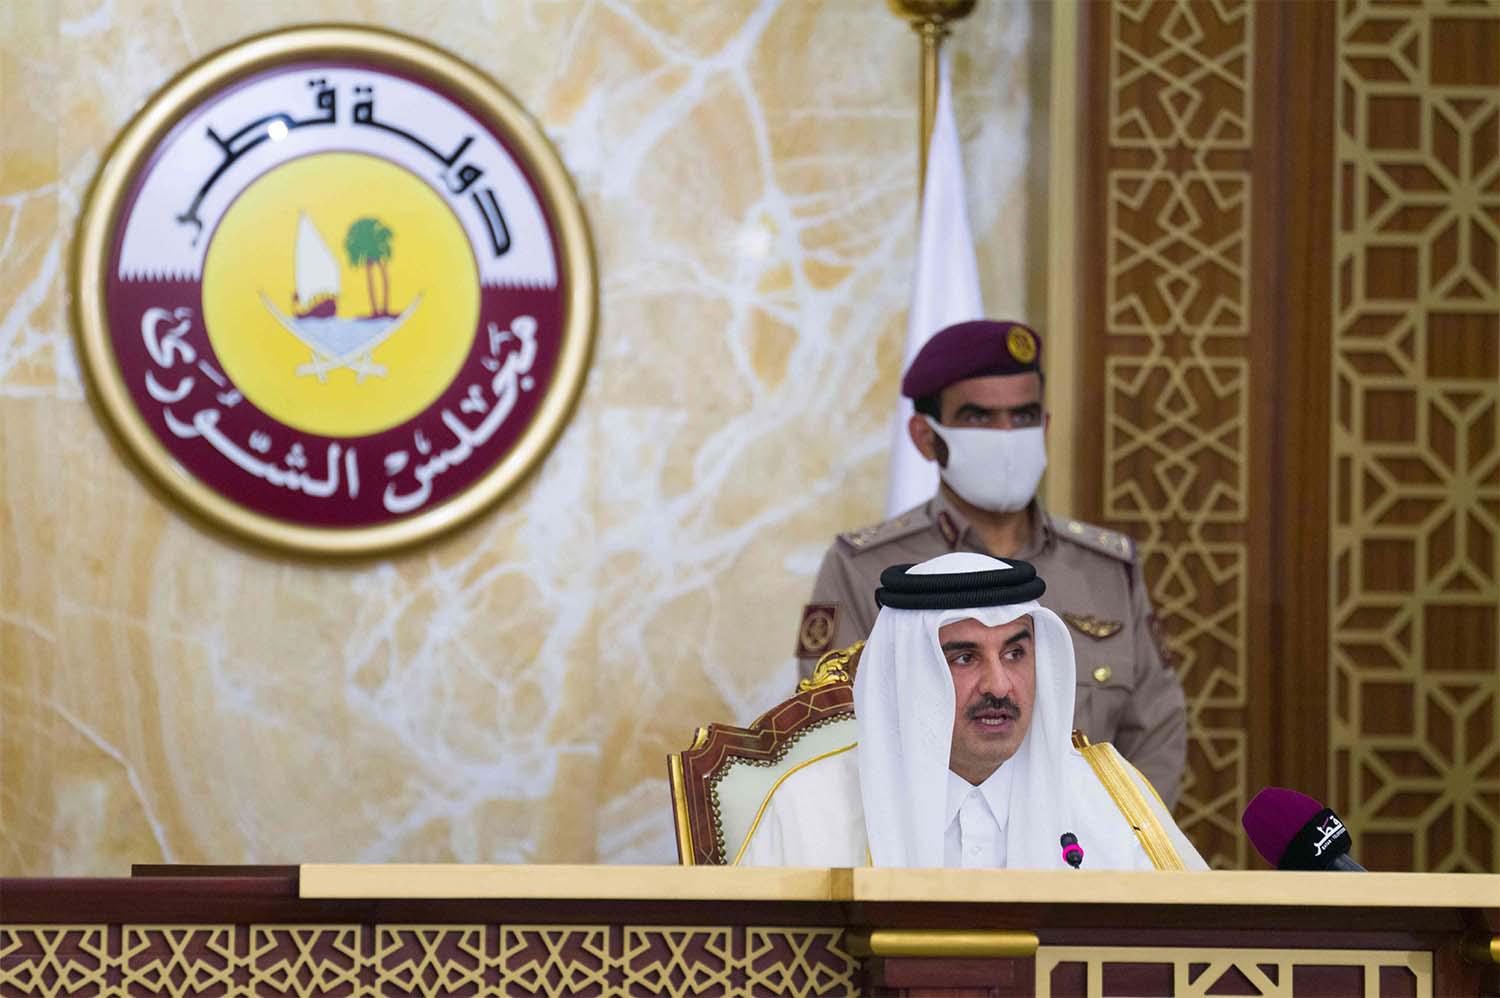 The Shura Council will have legislative authority and approve general state policies and the budget